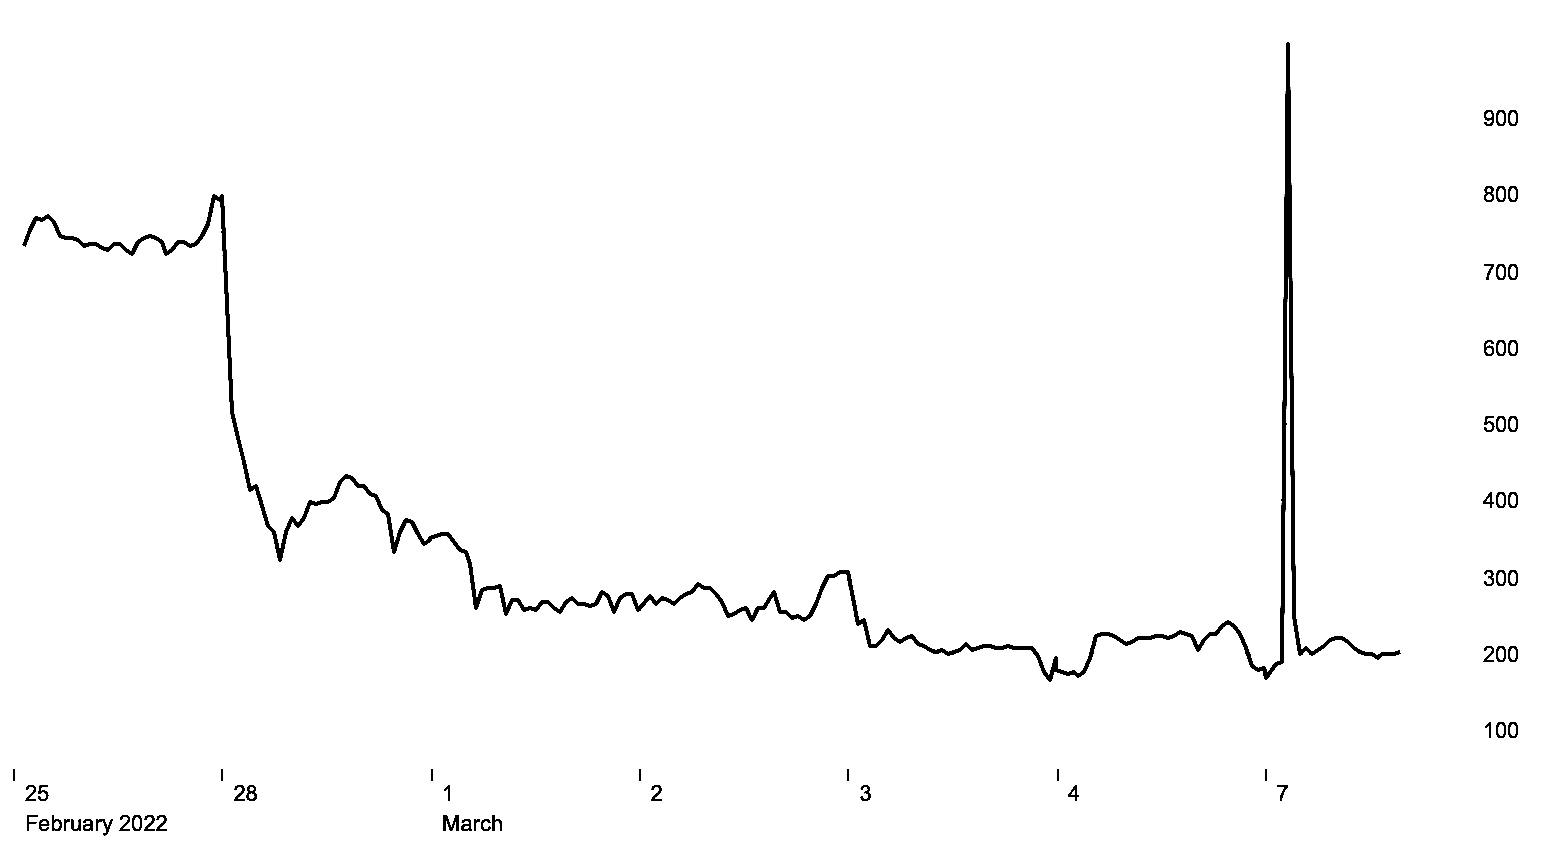 price chart of the polymetal share price showing the large spike in price on monday 7 march